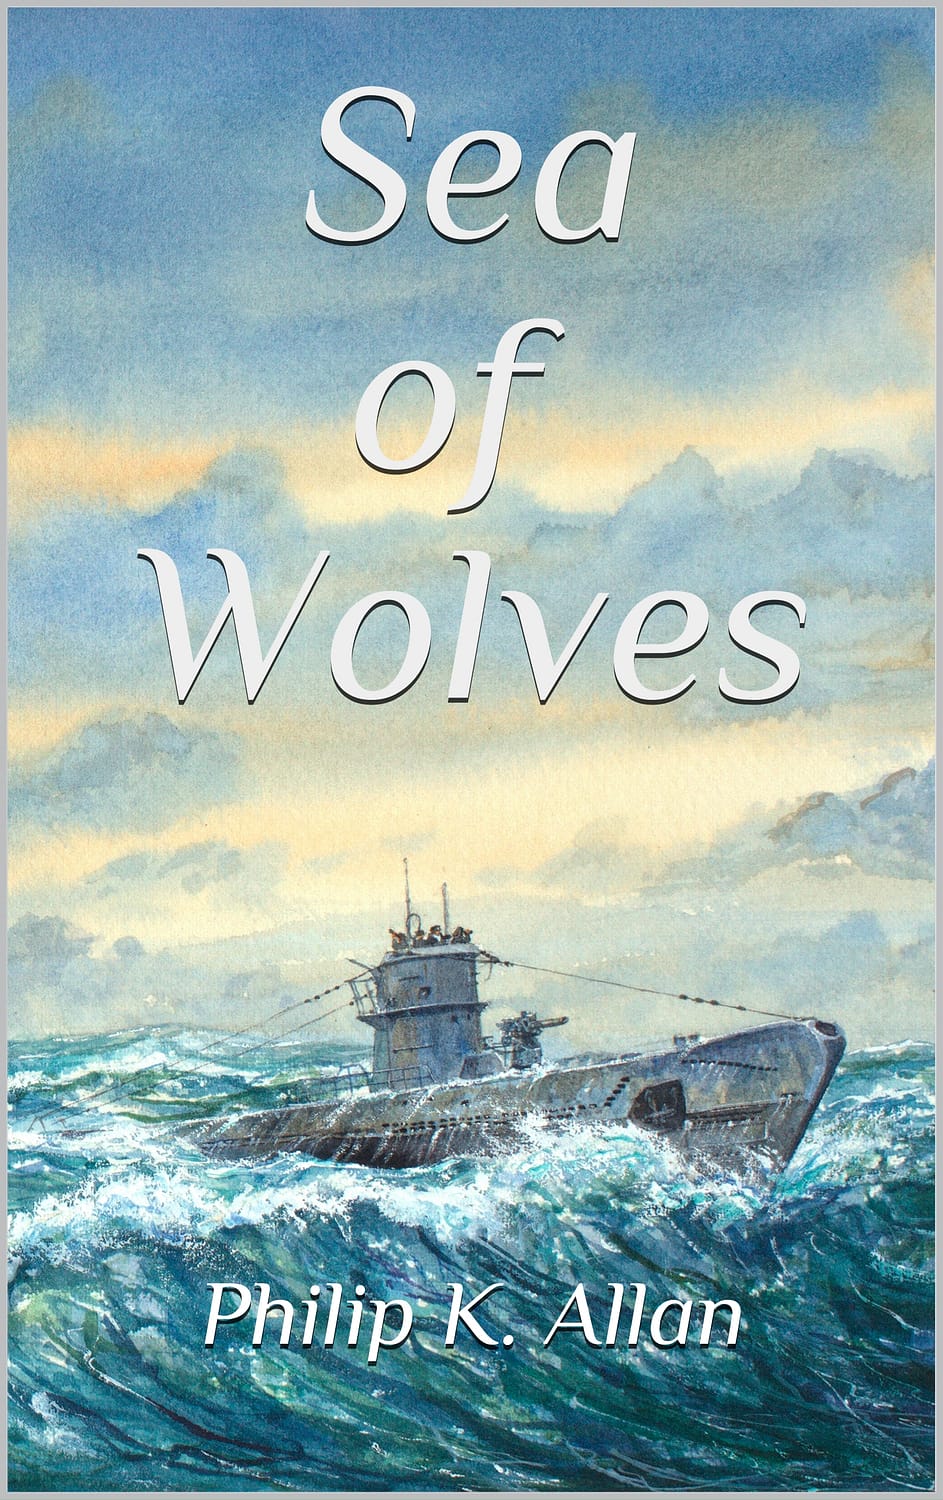 Sea of Wolves by Philip K Allan